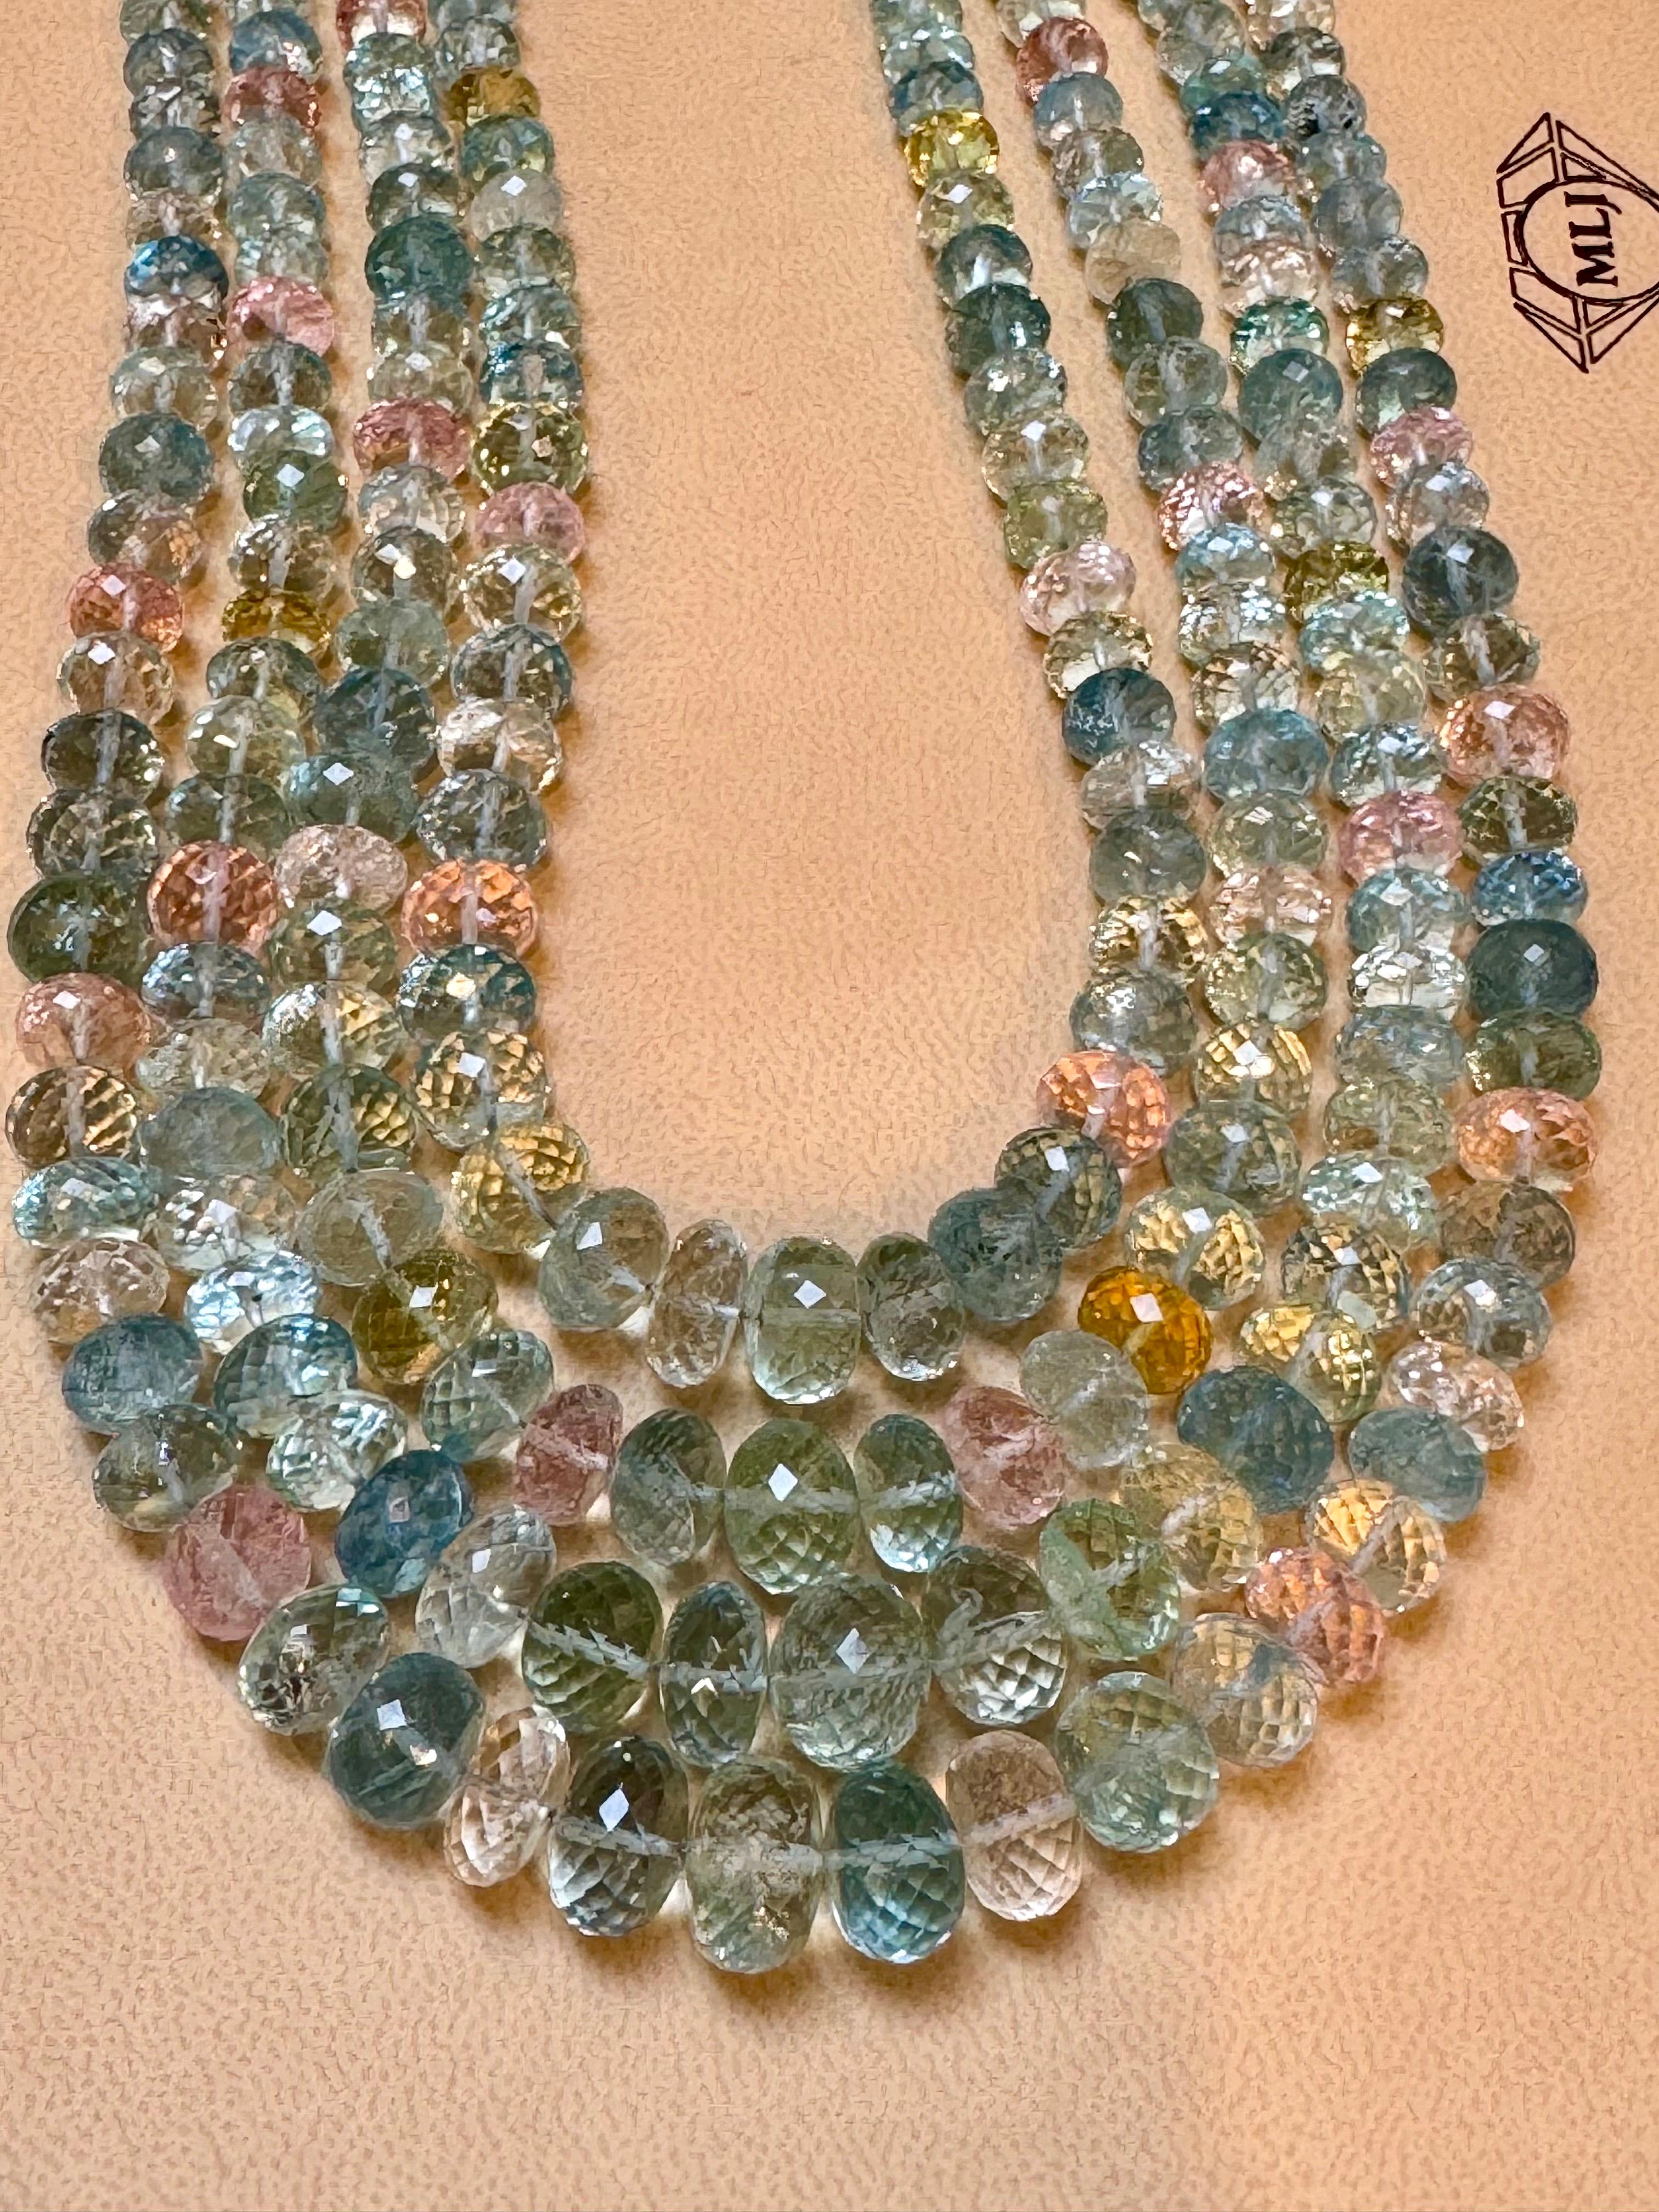 1000 Carat Natural Fine  Aquamarine Bead Necklace, Four Strand in Metal Clasp For Sale 3